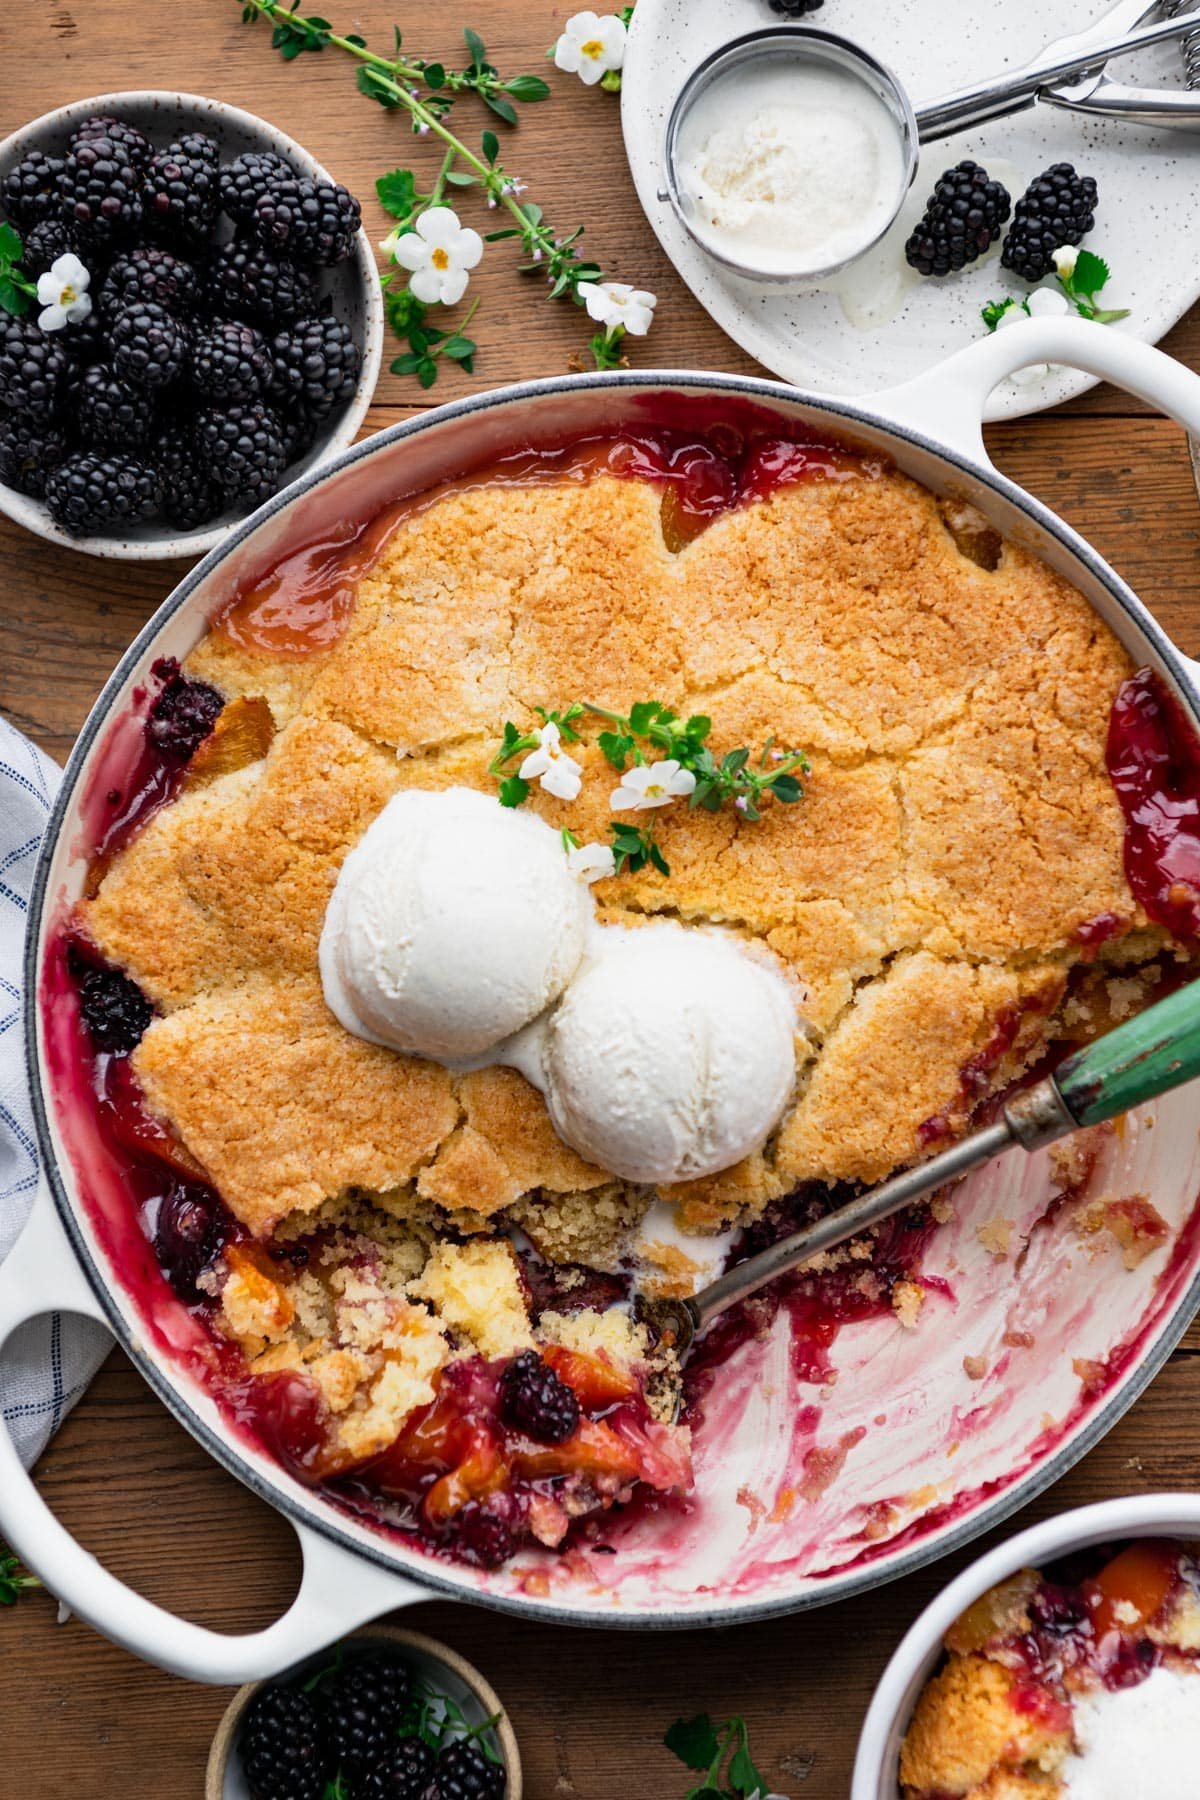 Easy blackberry peach cobbler with cornmeal biscuit crust on a wooden table.